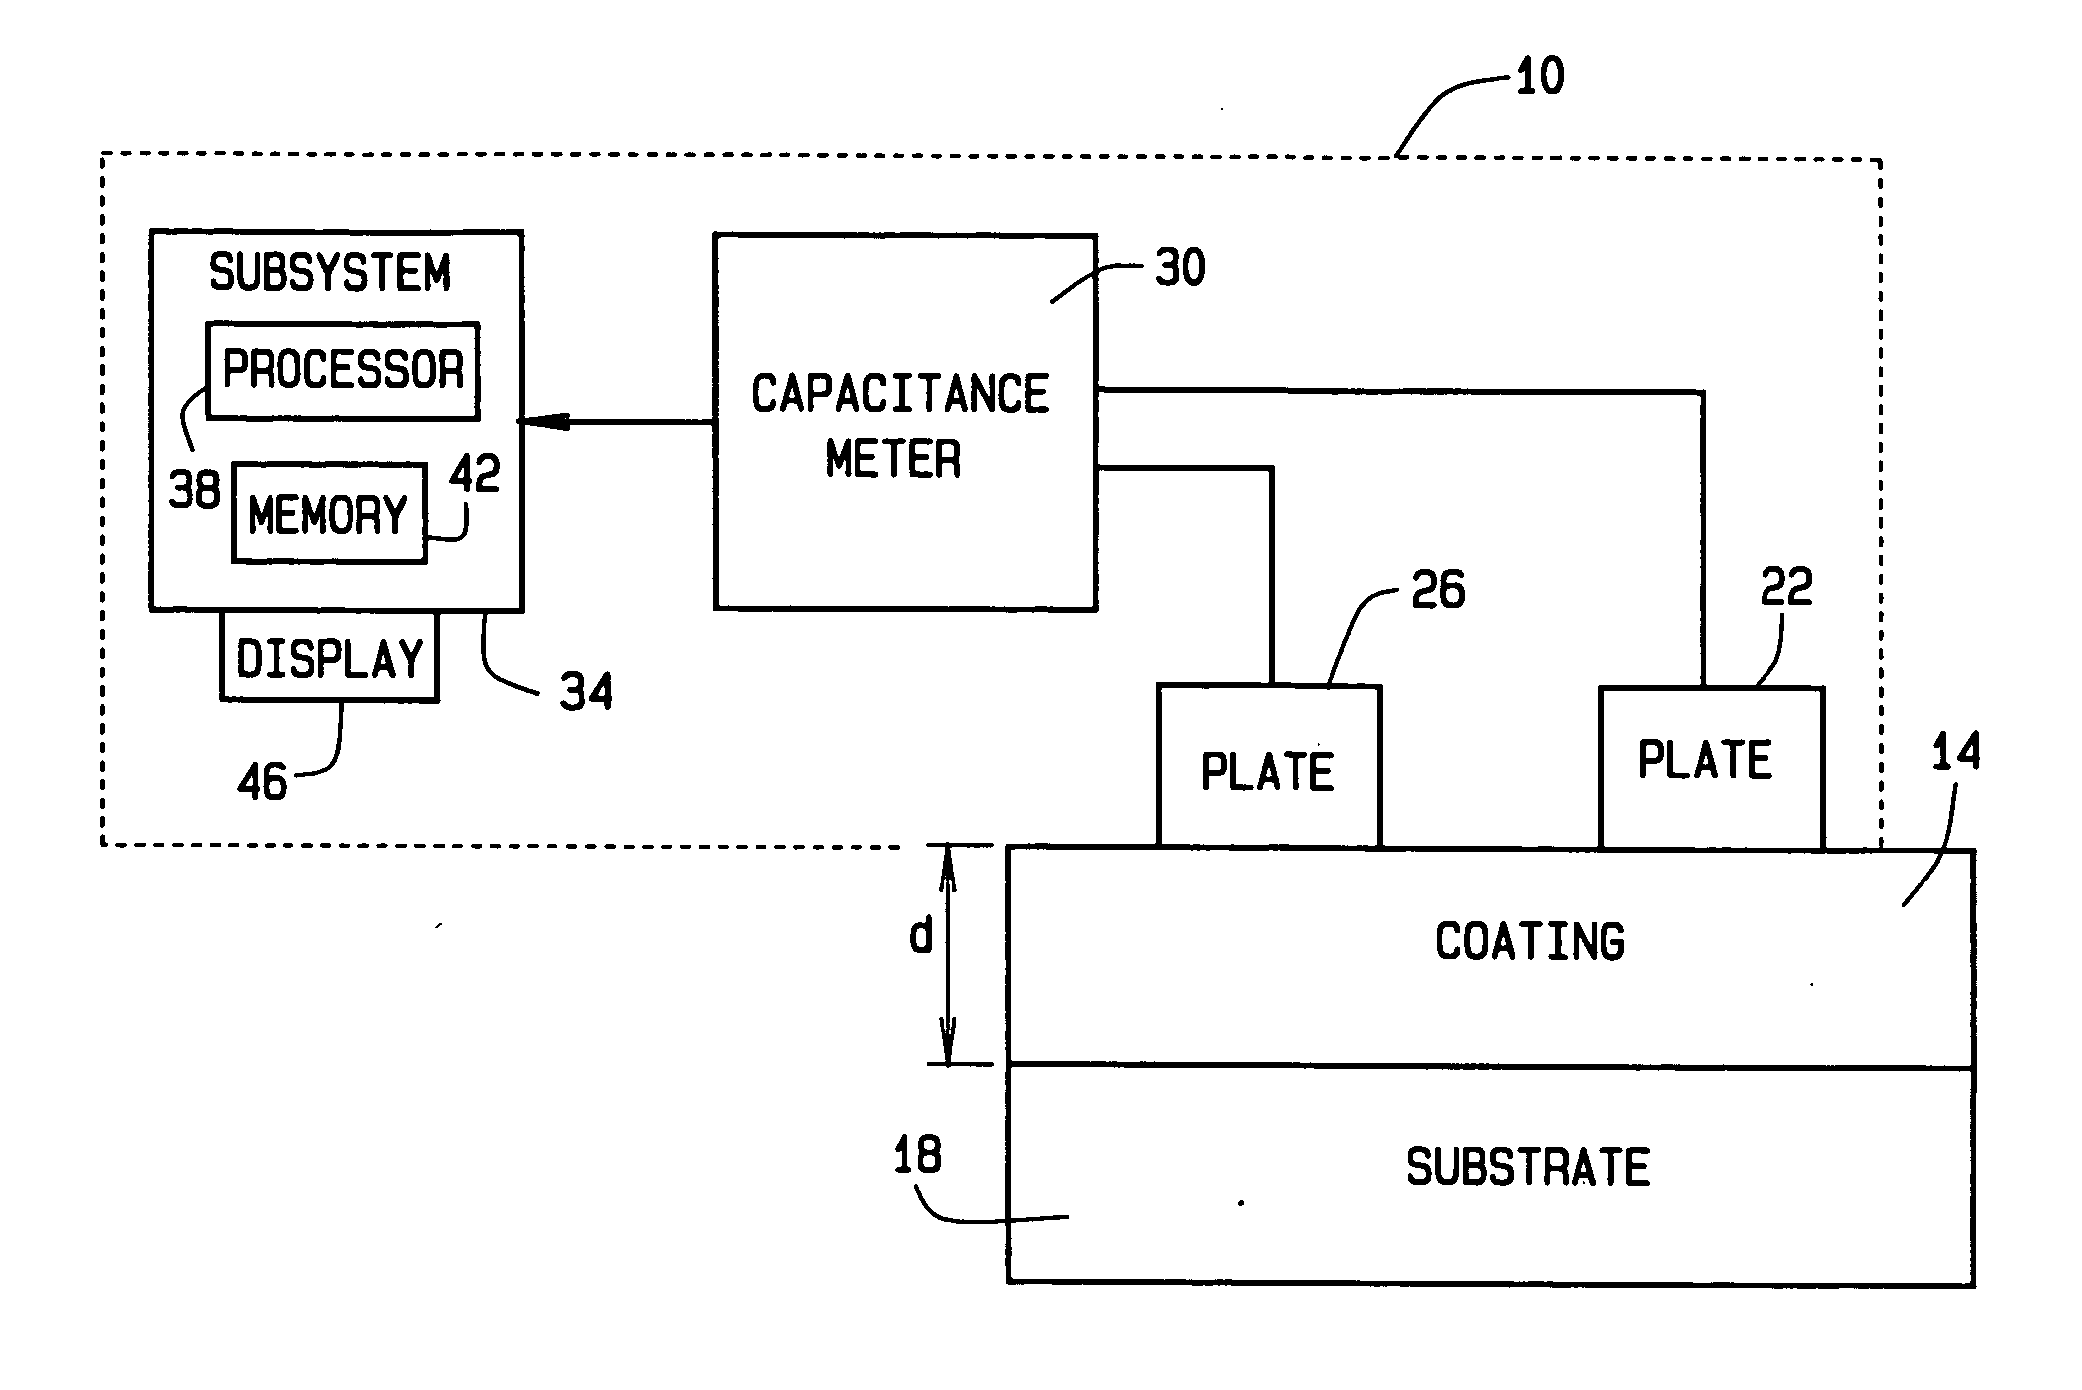 Measurement of a coating on a composite using capacitance